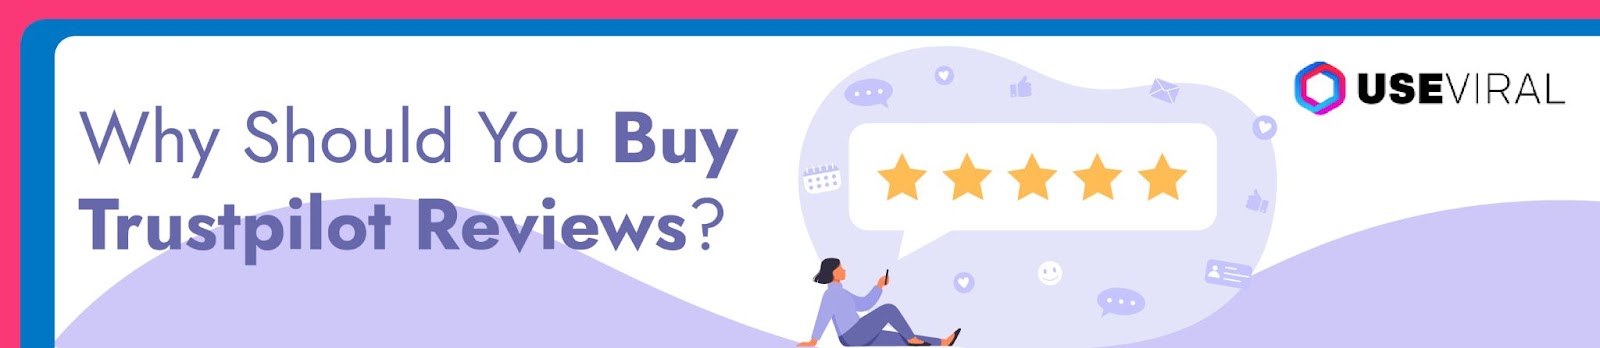 Why Should You Buy Trustpilot Reviews?